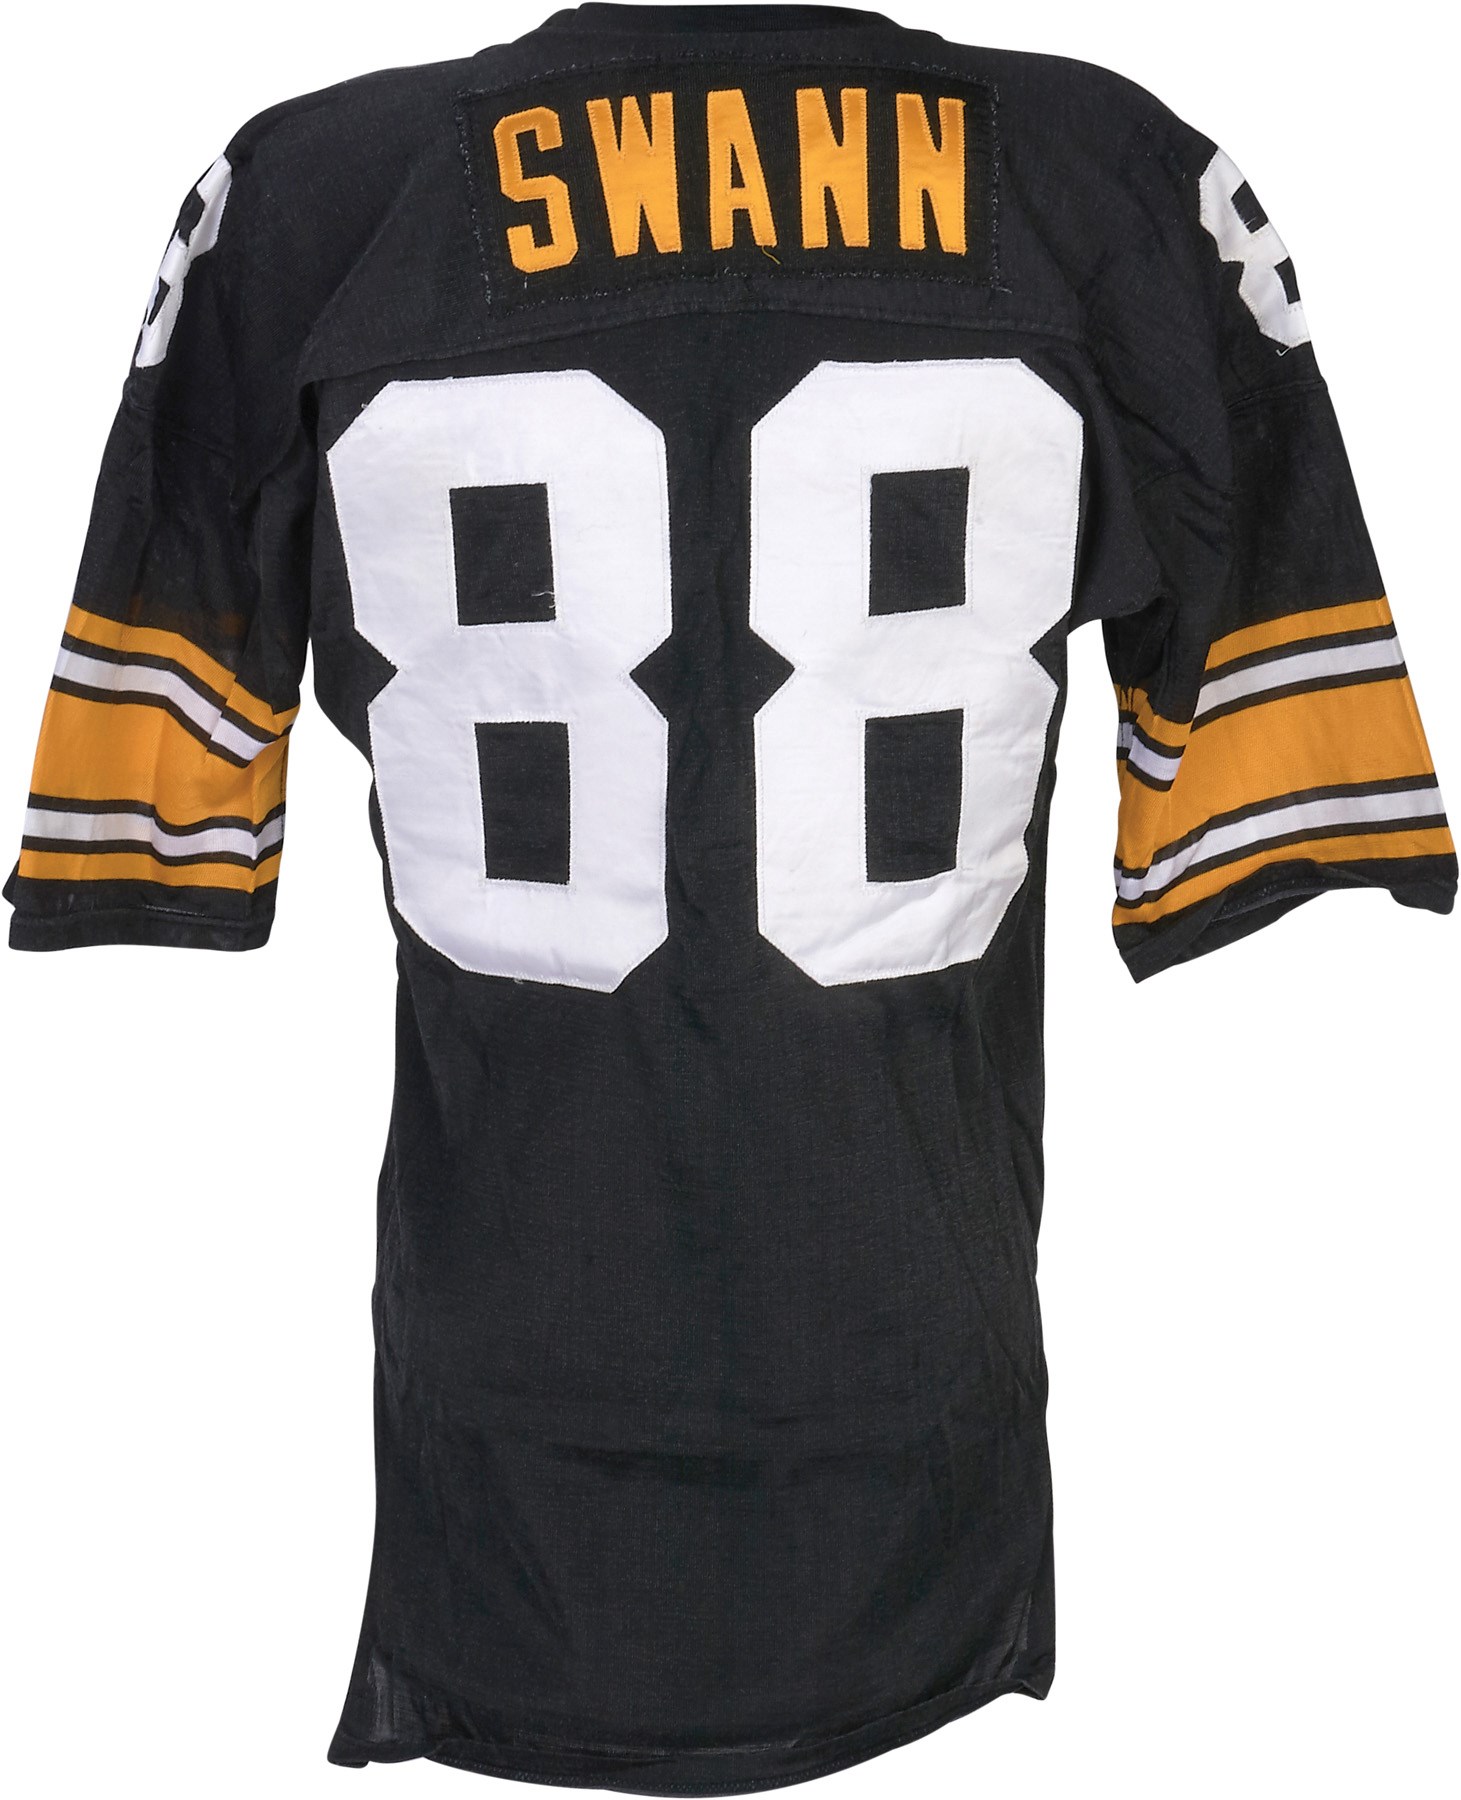 The Pittsburgh Steelers Game Worn Jersey Archive - 1982 Lynn Swann Pittsburgh Steelers Game Worn Jersey (Photo-Matched)